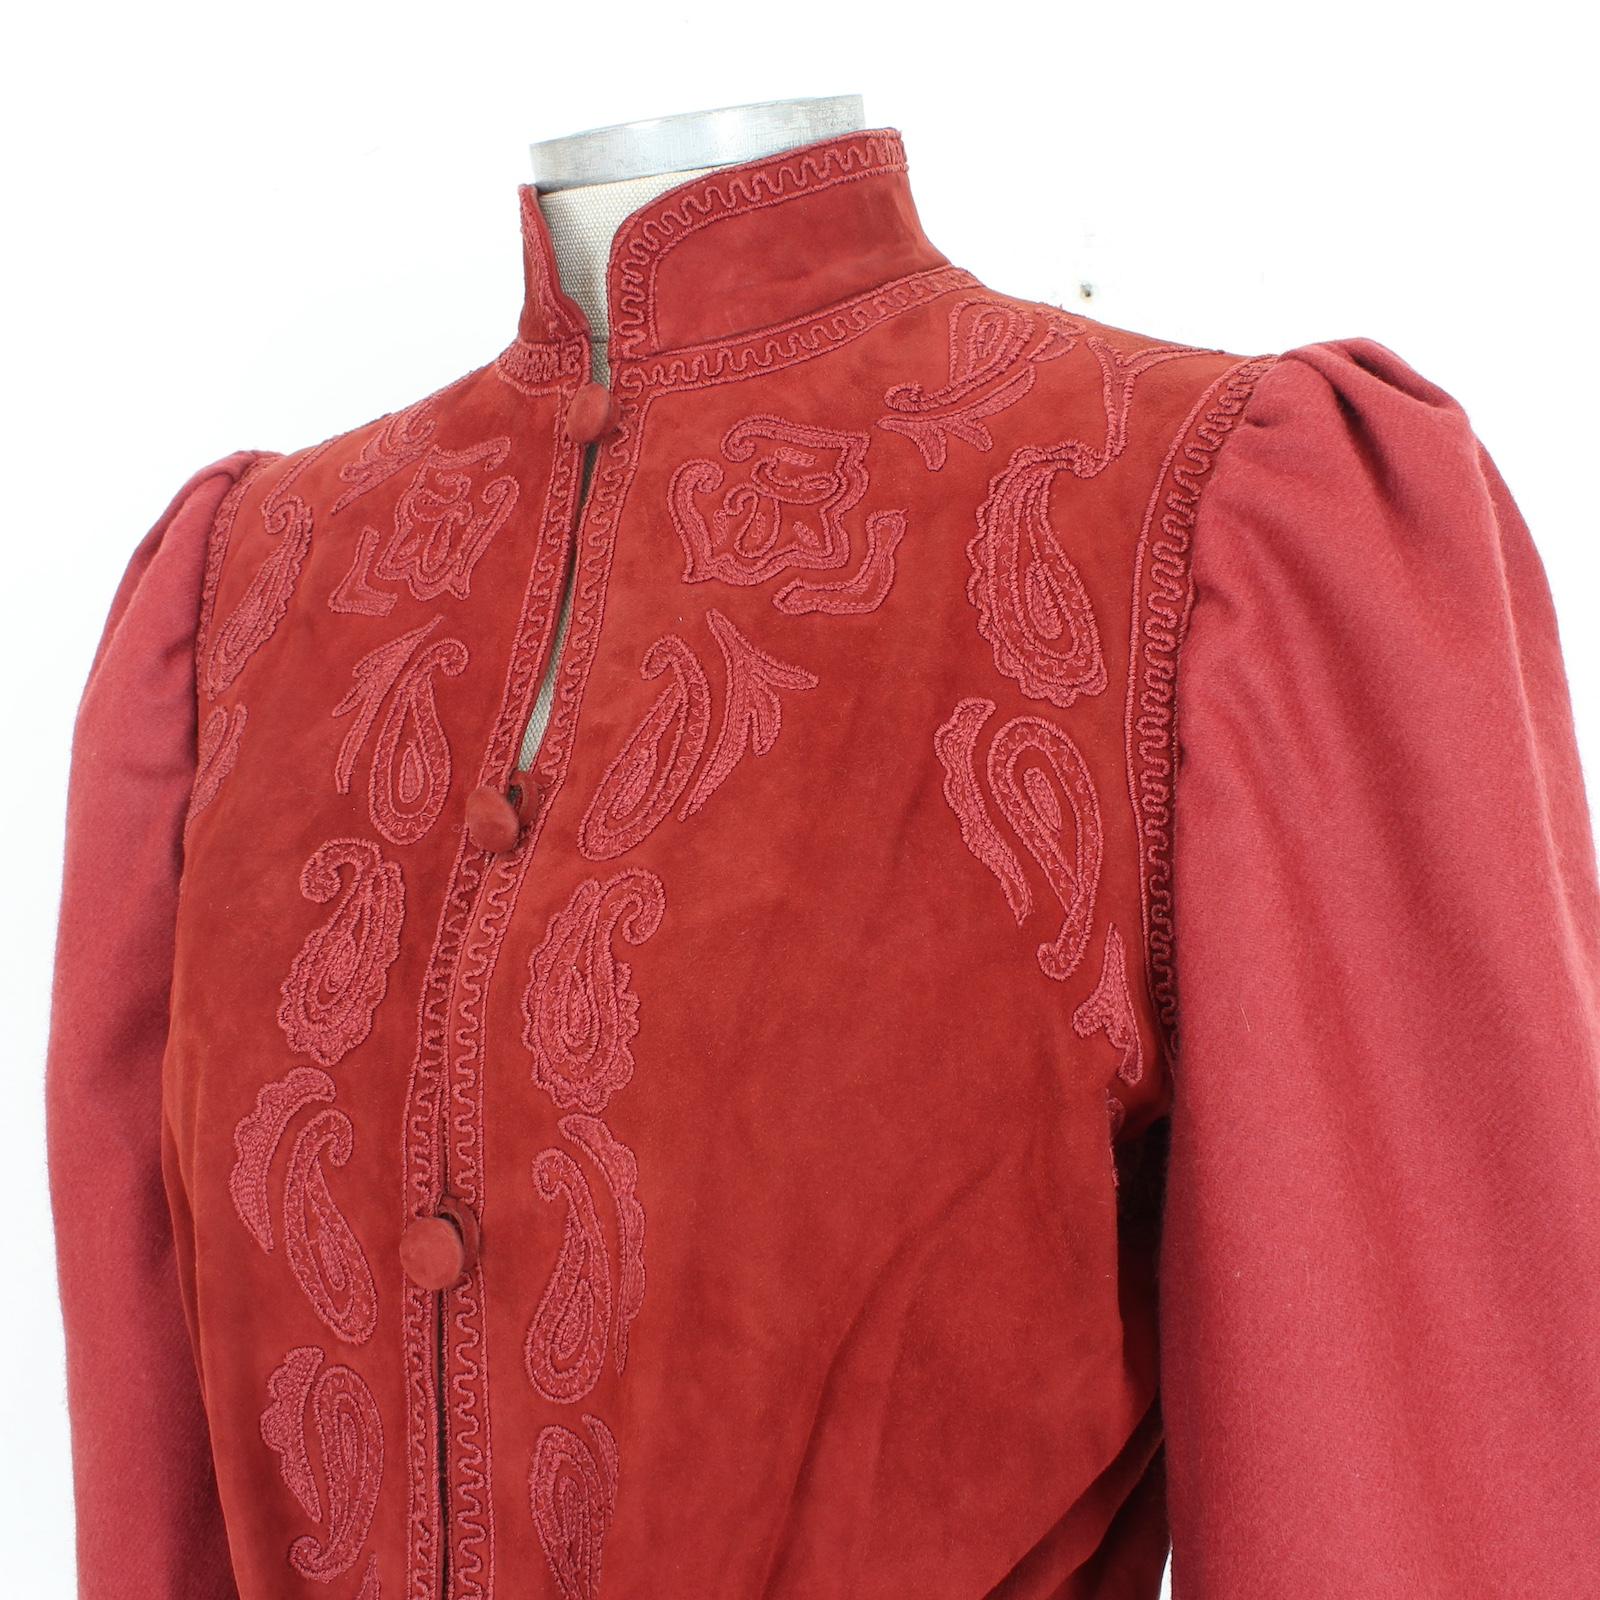 Lancetti Red Leather Paisley Jacket Blazer 1980s For Sale 1